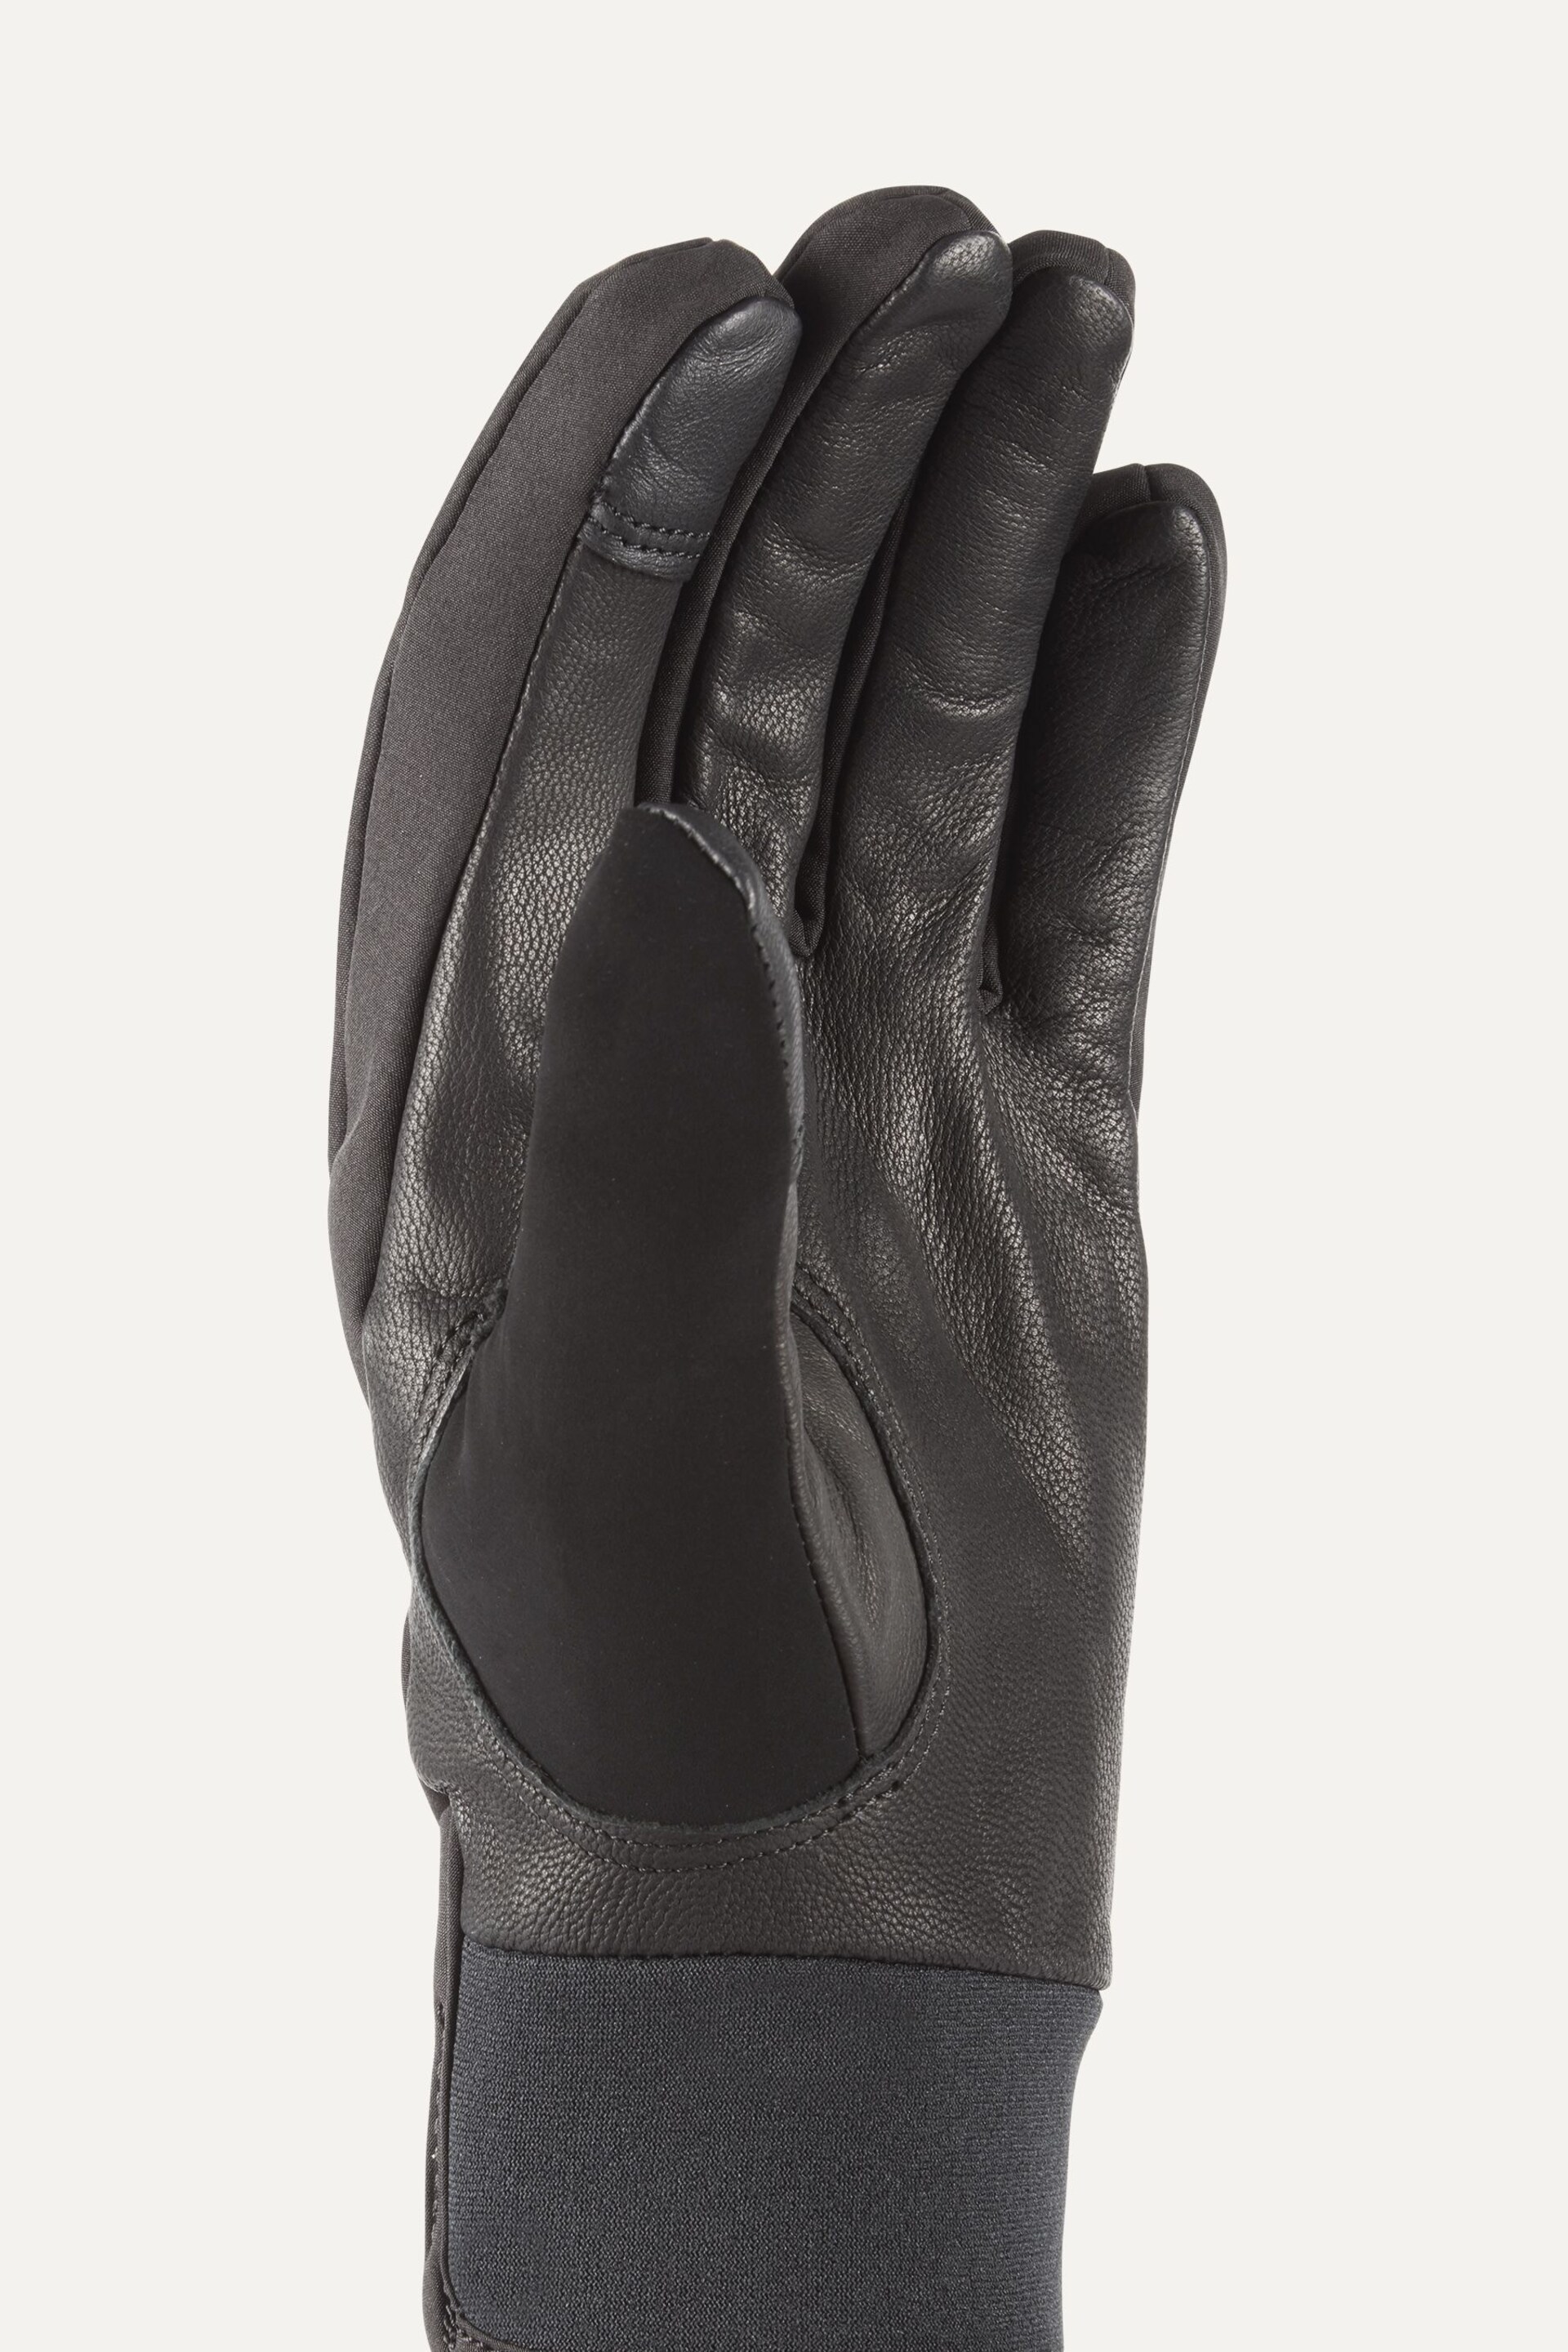 Sealskinz Kelling Women{Sq}S Waterproof All Weather Insulated Glove - Image 2 of 3